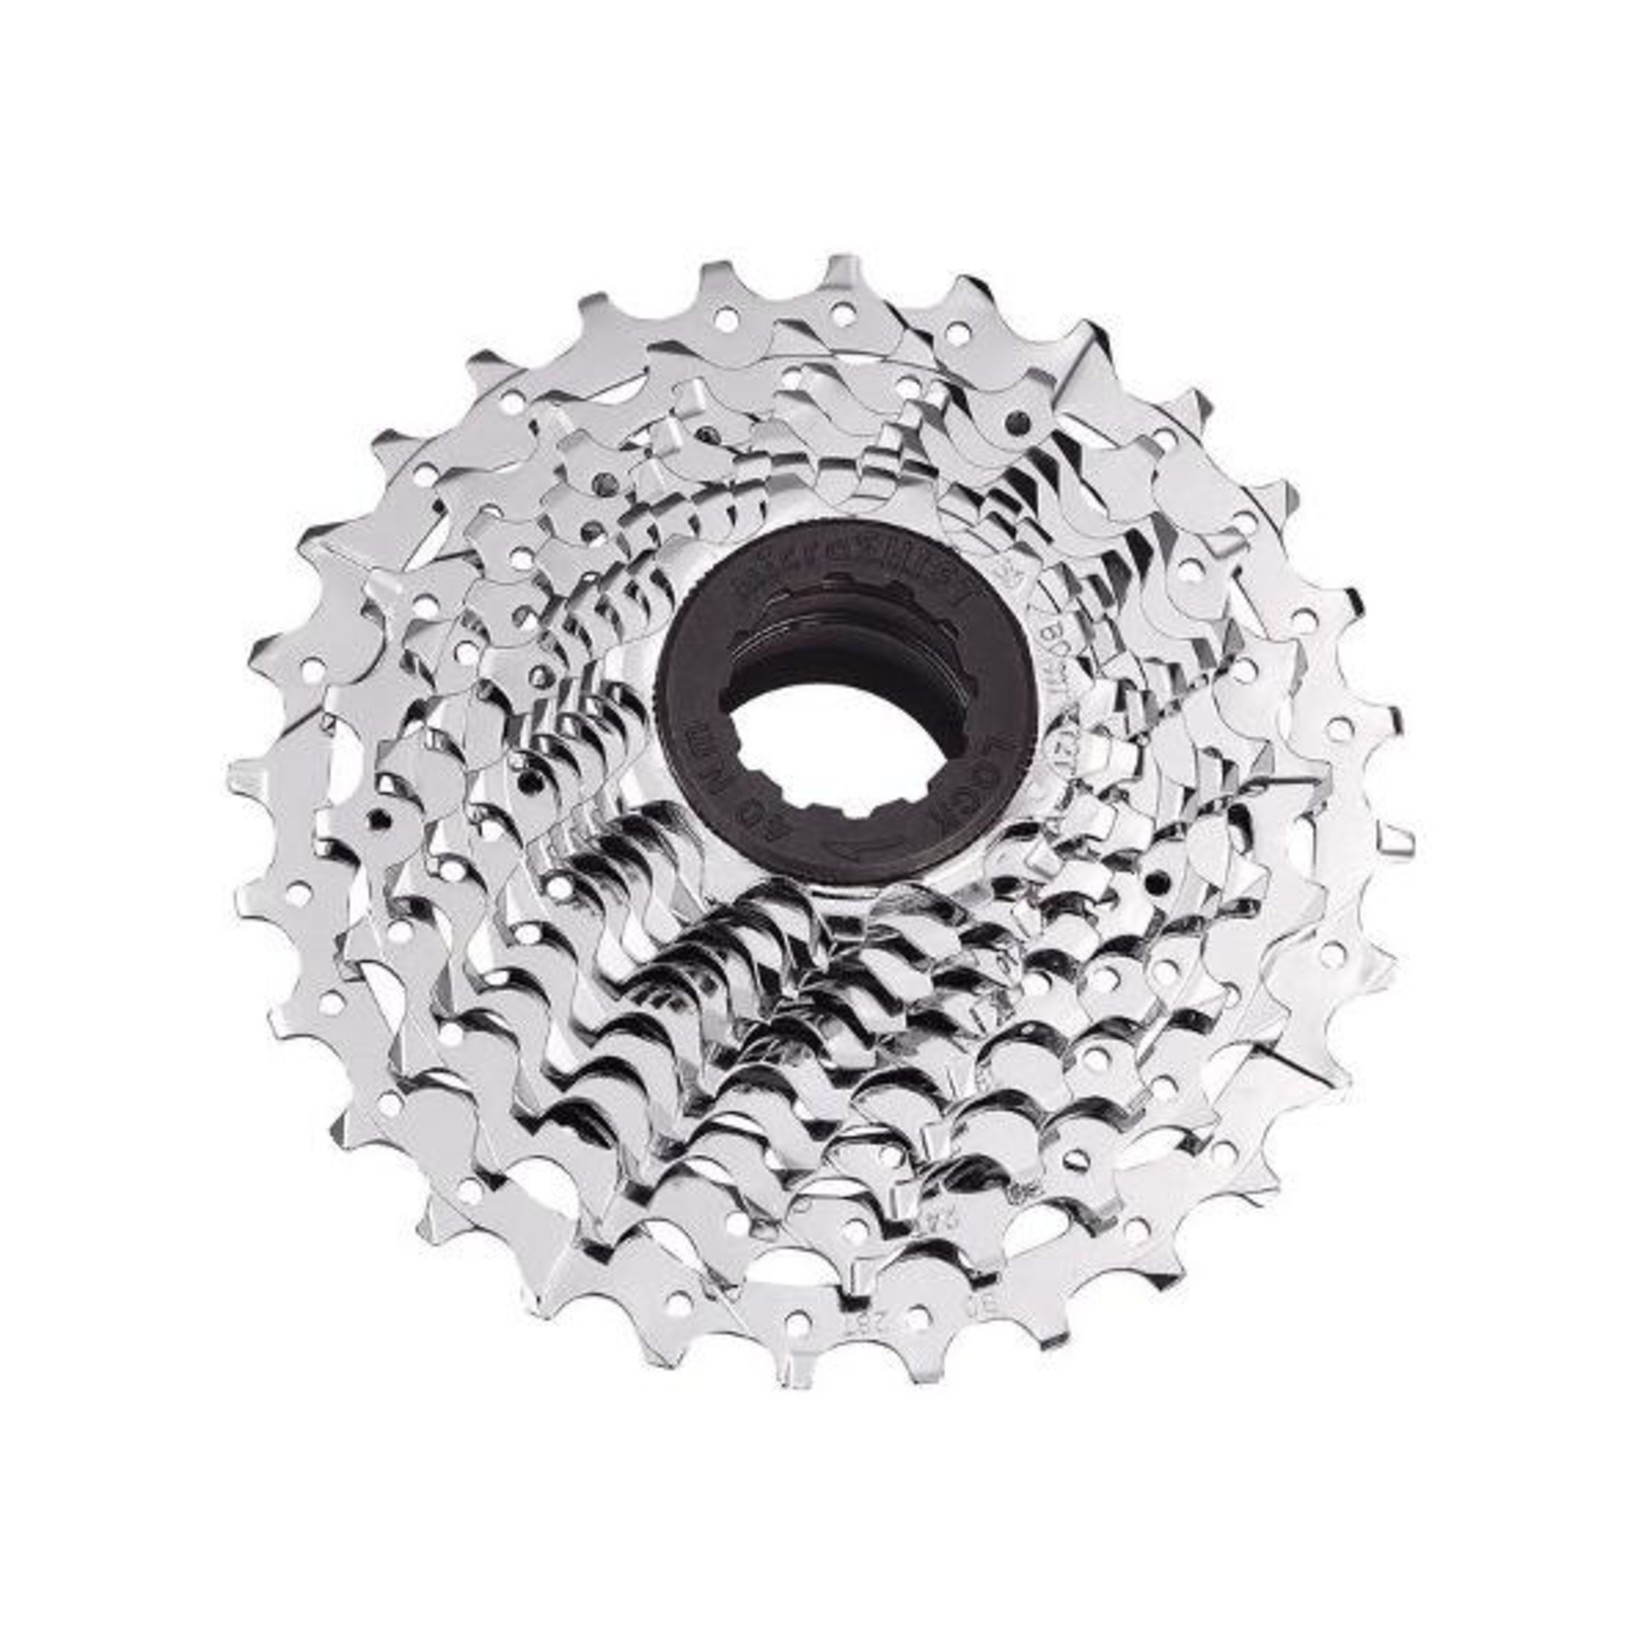 Microshift Microshift Bicycle Cassette Centos 11 CS-H1100 - 11 Speed - 11-28T - Silver